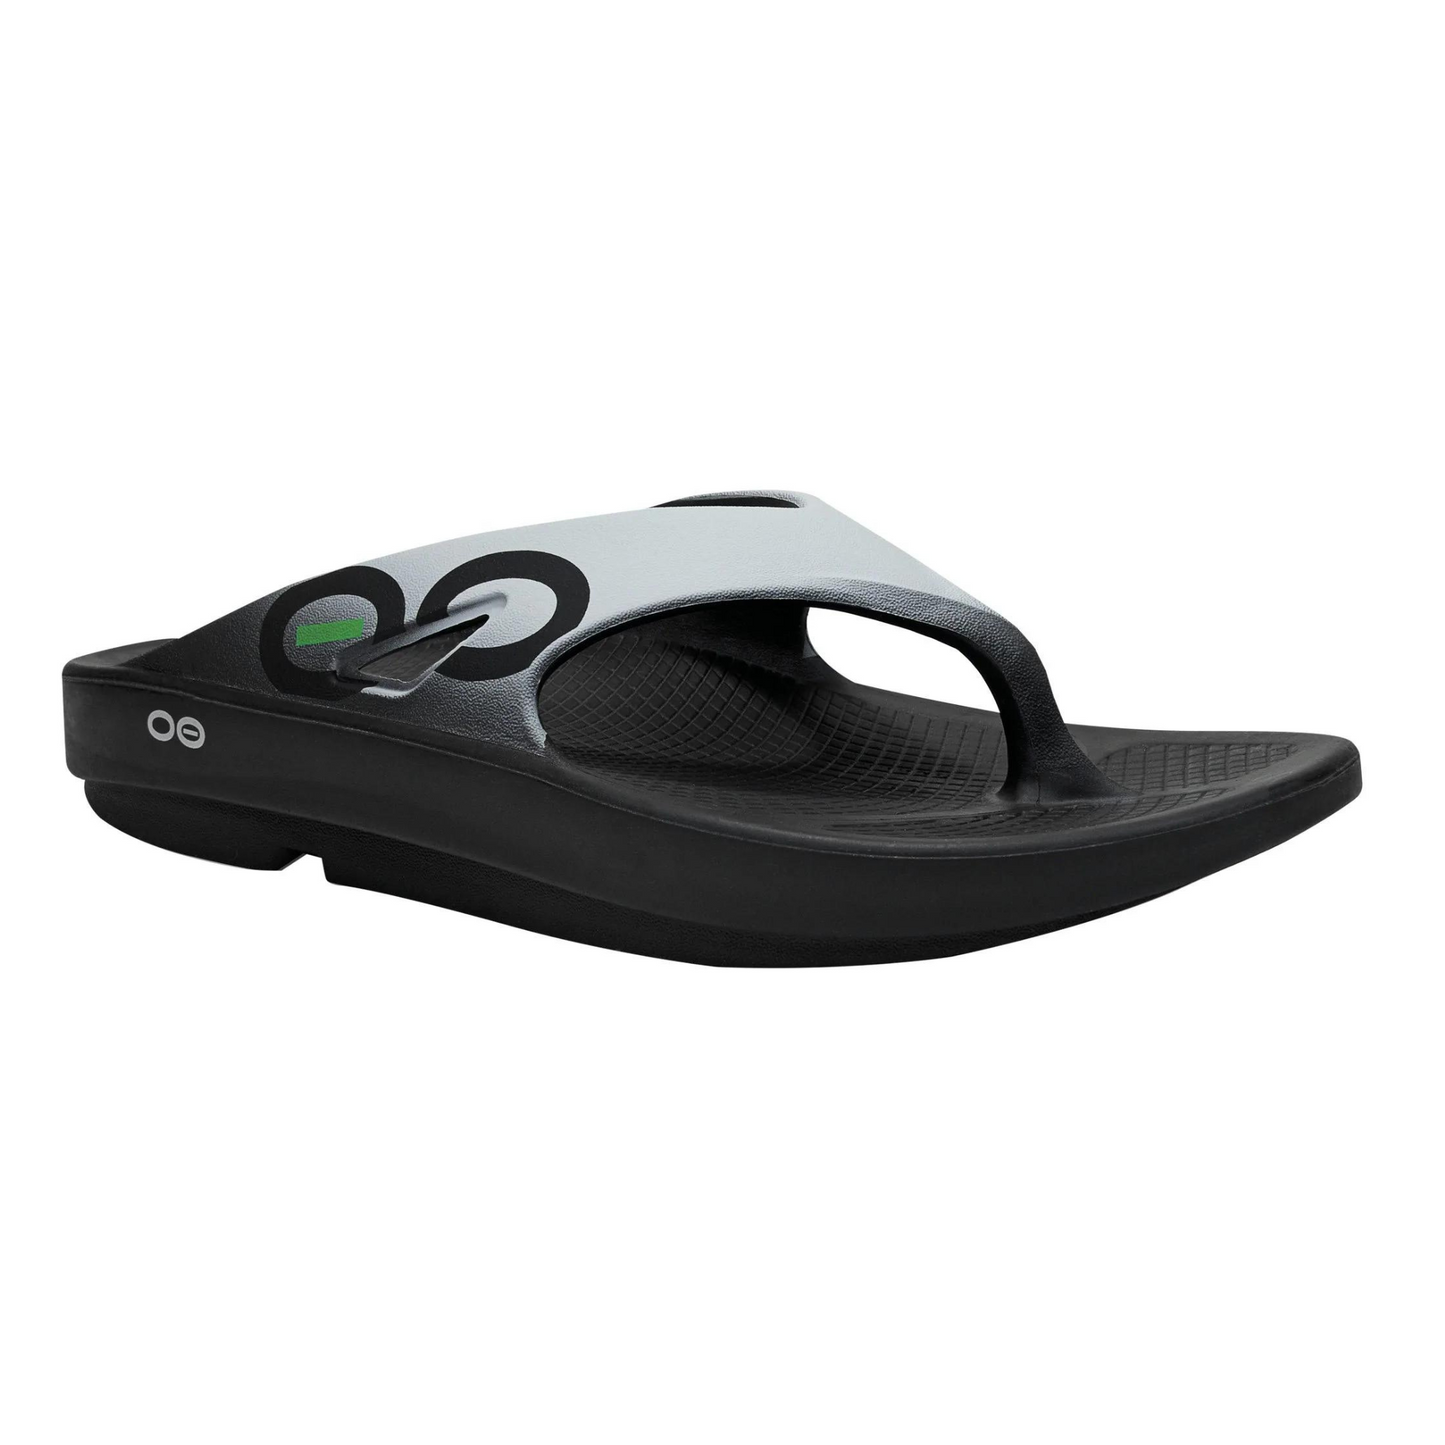 Flip flop with thick arched black sole to ombré light grey upper. 